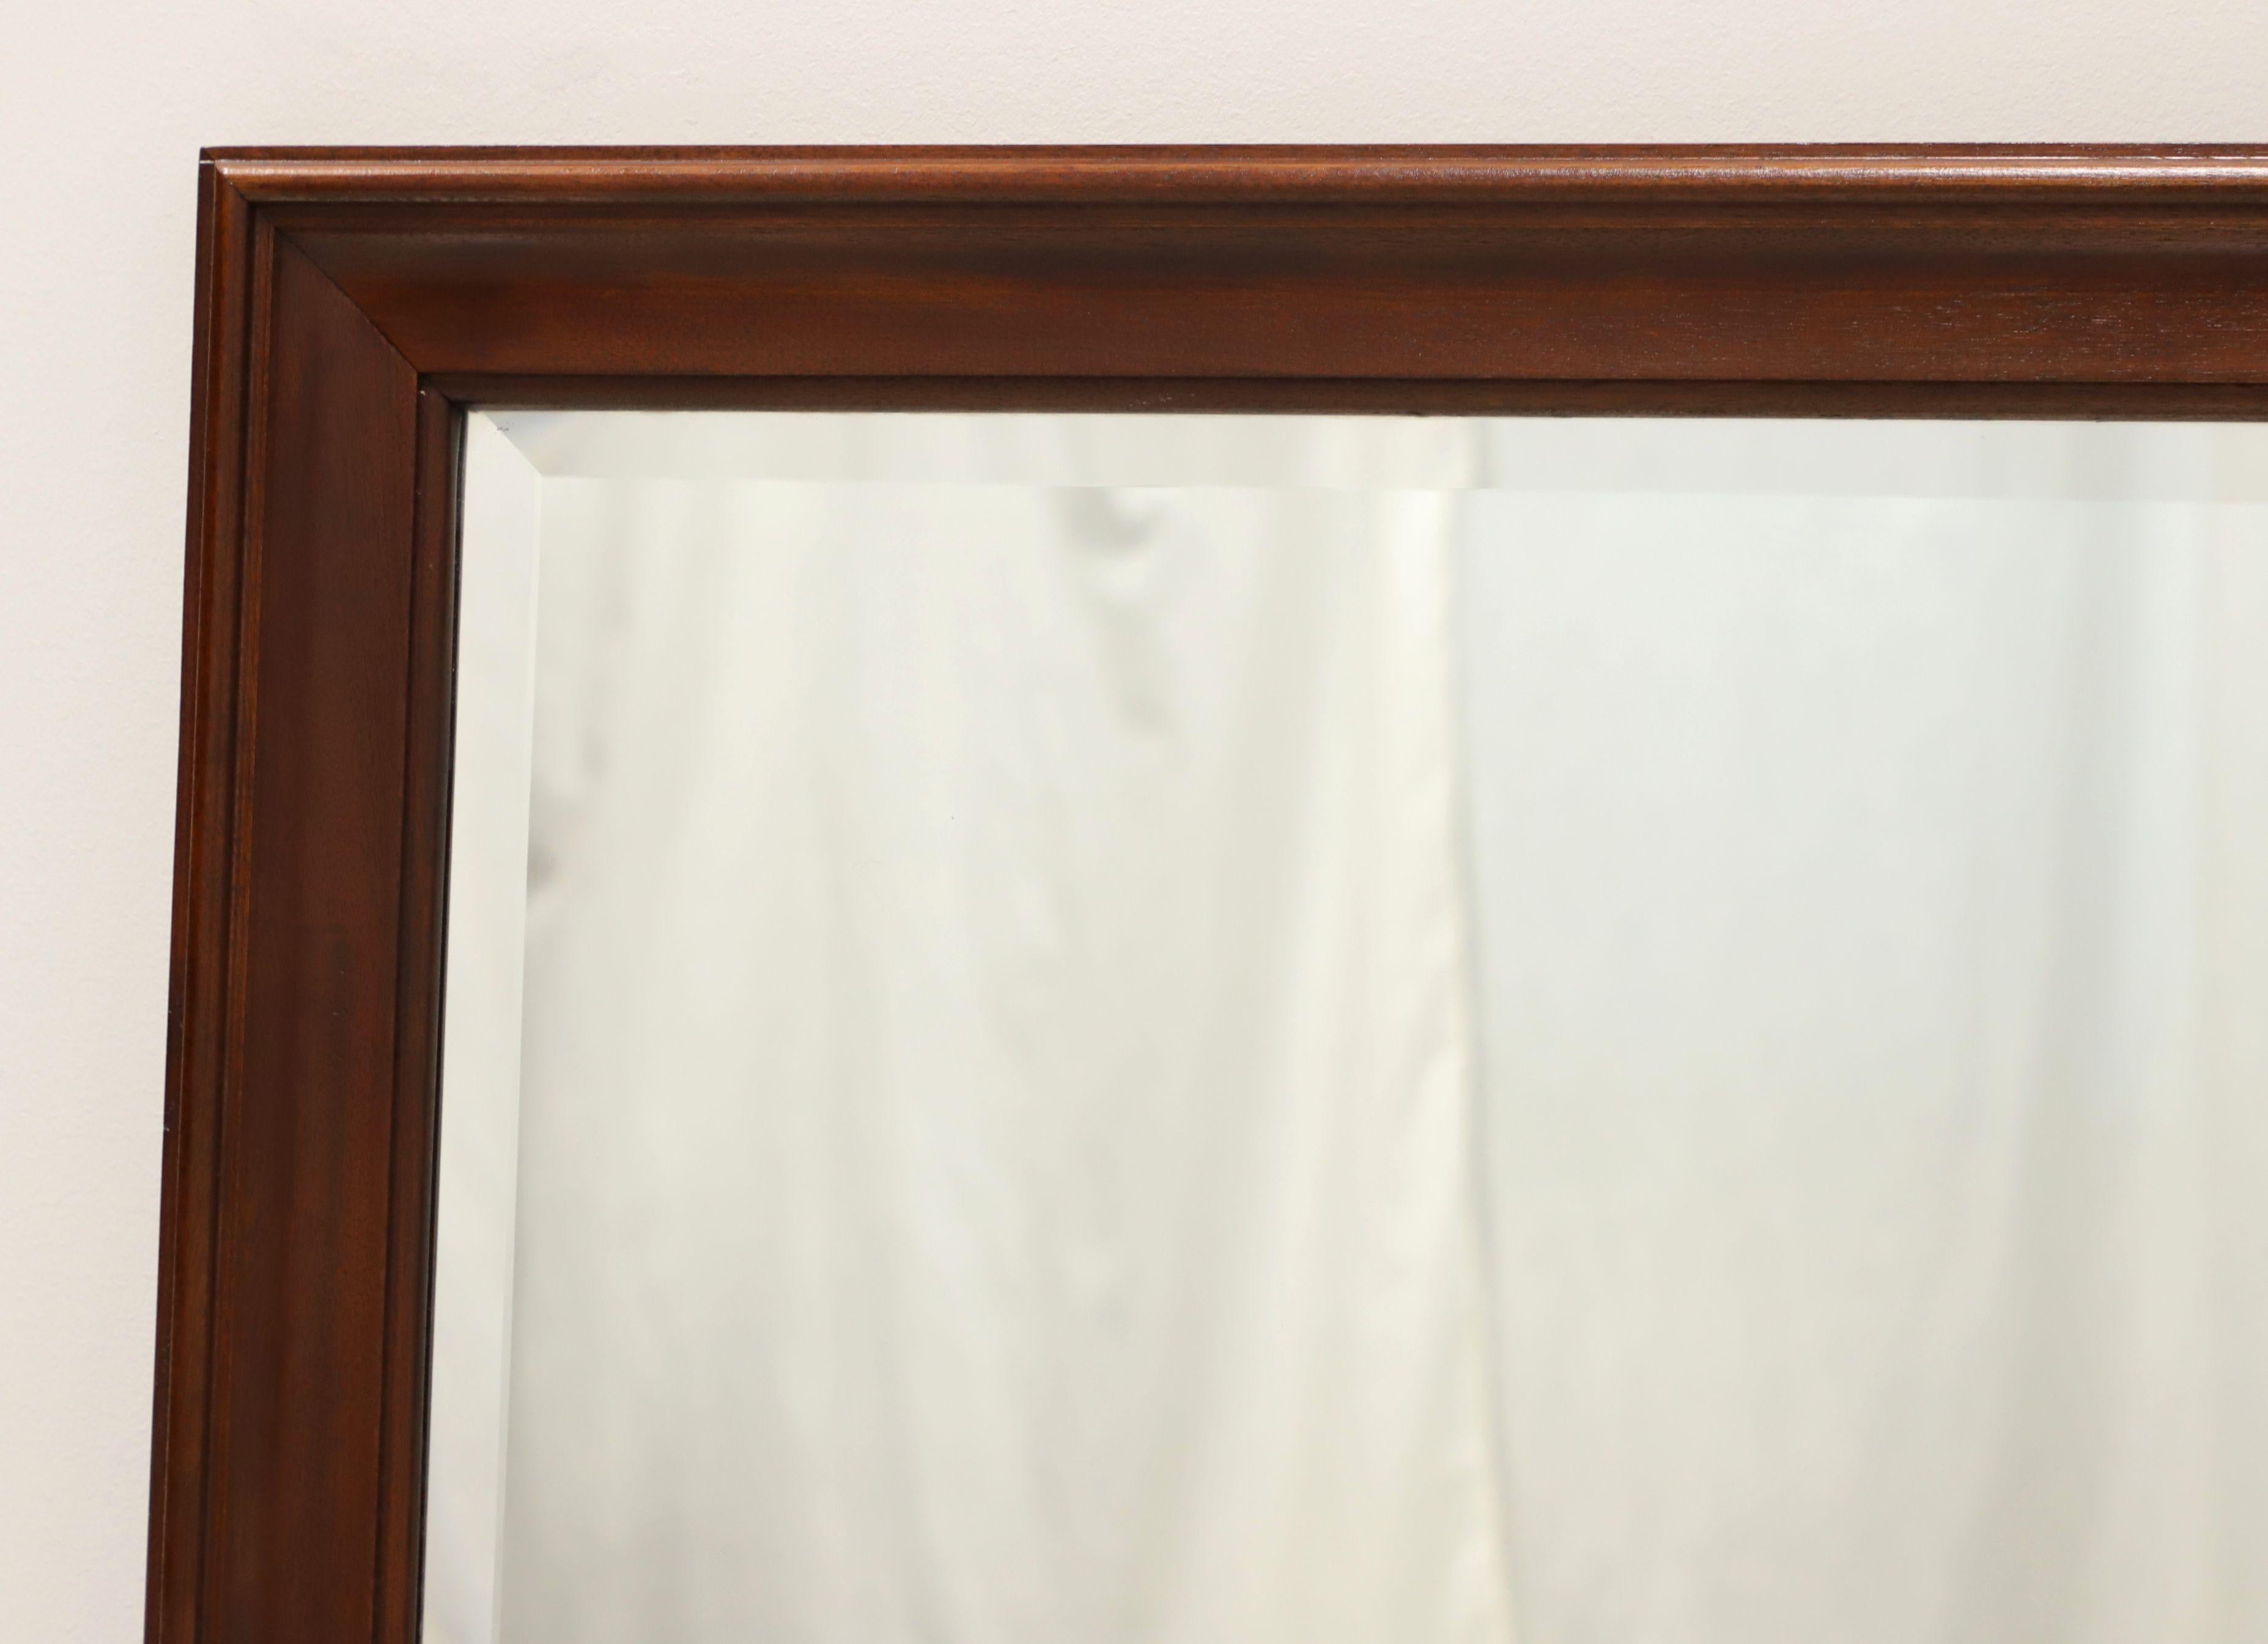 A Traditional style rectangular dresser or wall mirror by top-quality furniture maker Craftique. Beveled mirror glass in a solid mahogany frame with their Mellowax finish. Made in Mebane, North Carolina, USA, in the late 20th Century.

Measures: